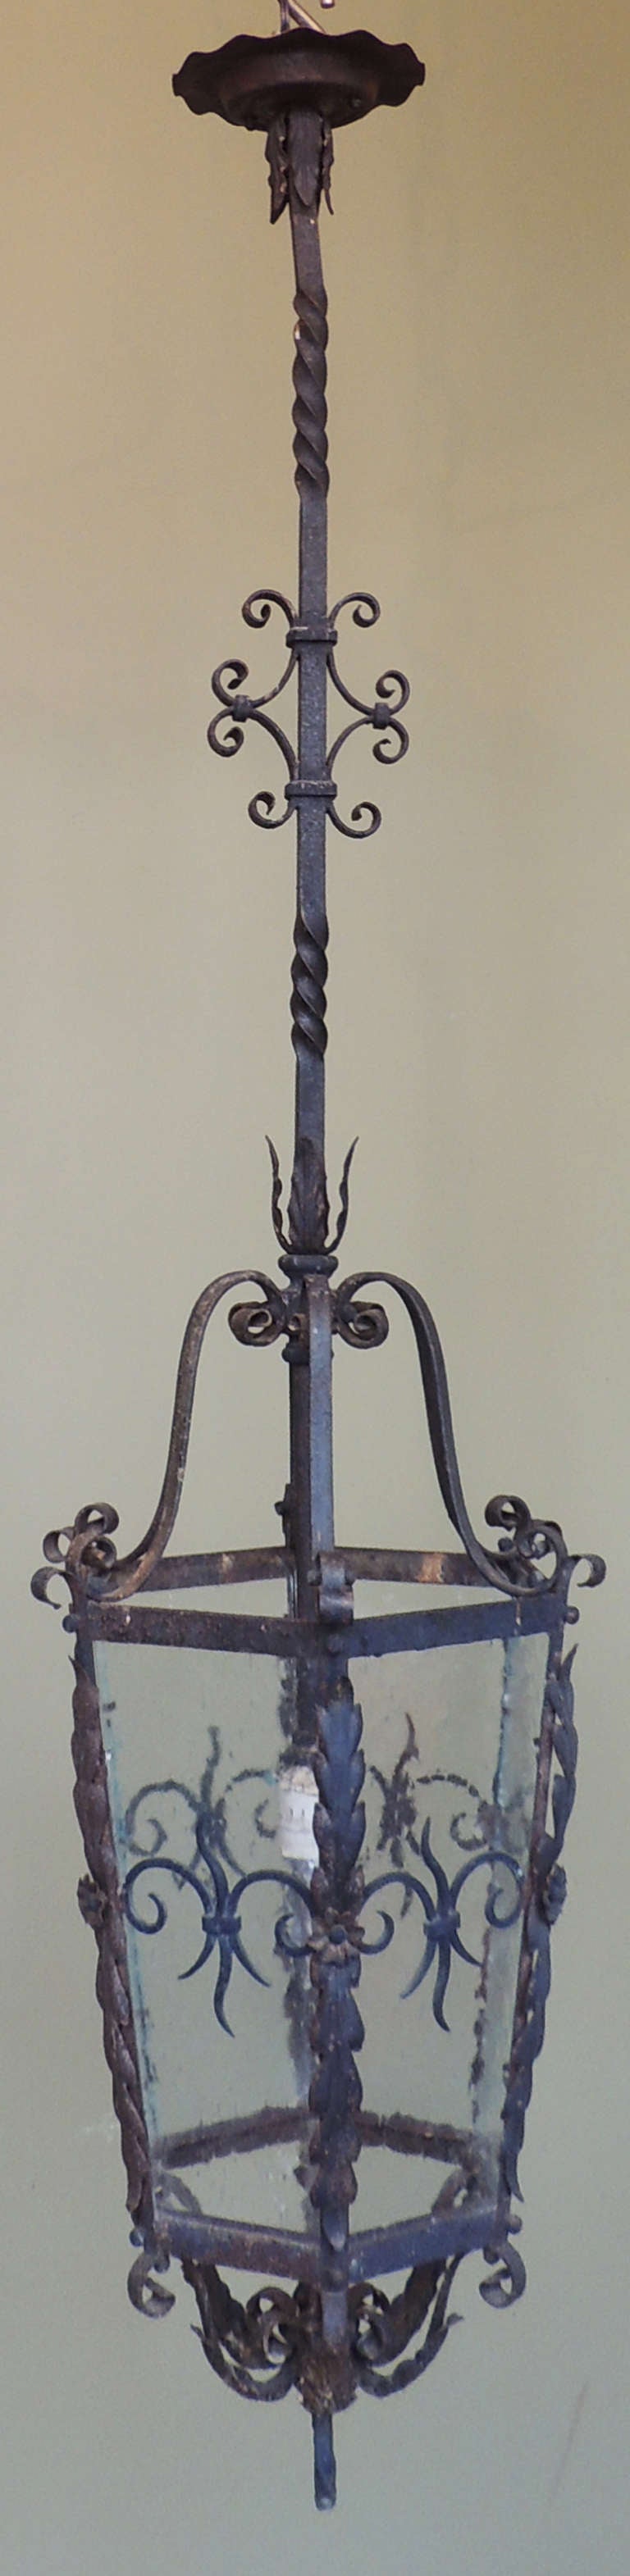 This French Gothic wrought iron lantern, circa 1870, features hand-wrought iron with scroll and foliate designs and glass panels. The lantern was originally gas but has been recently rewired with new sockets.